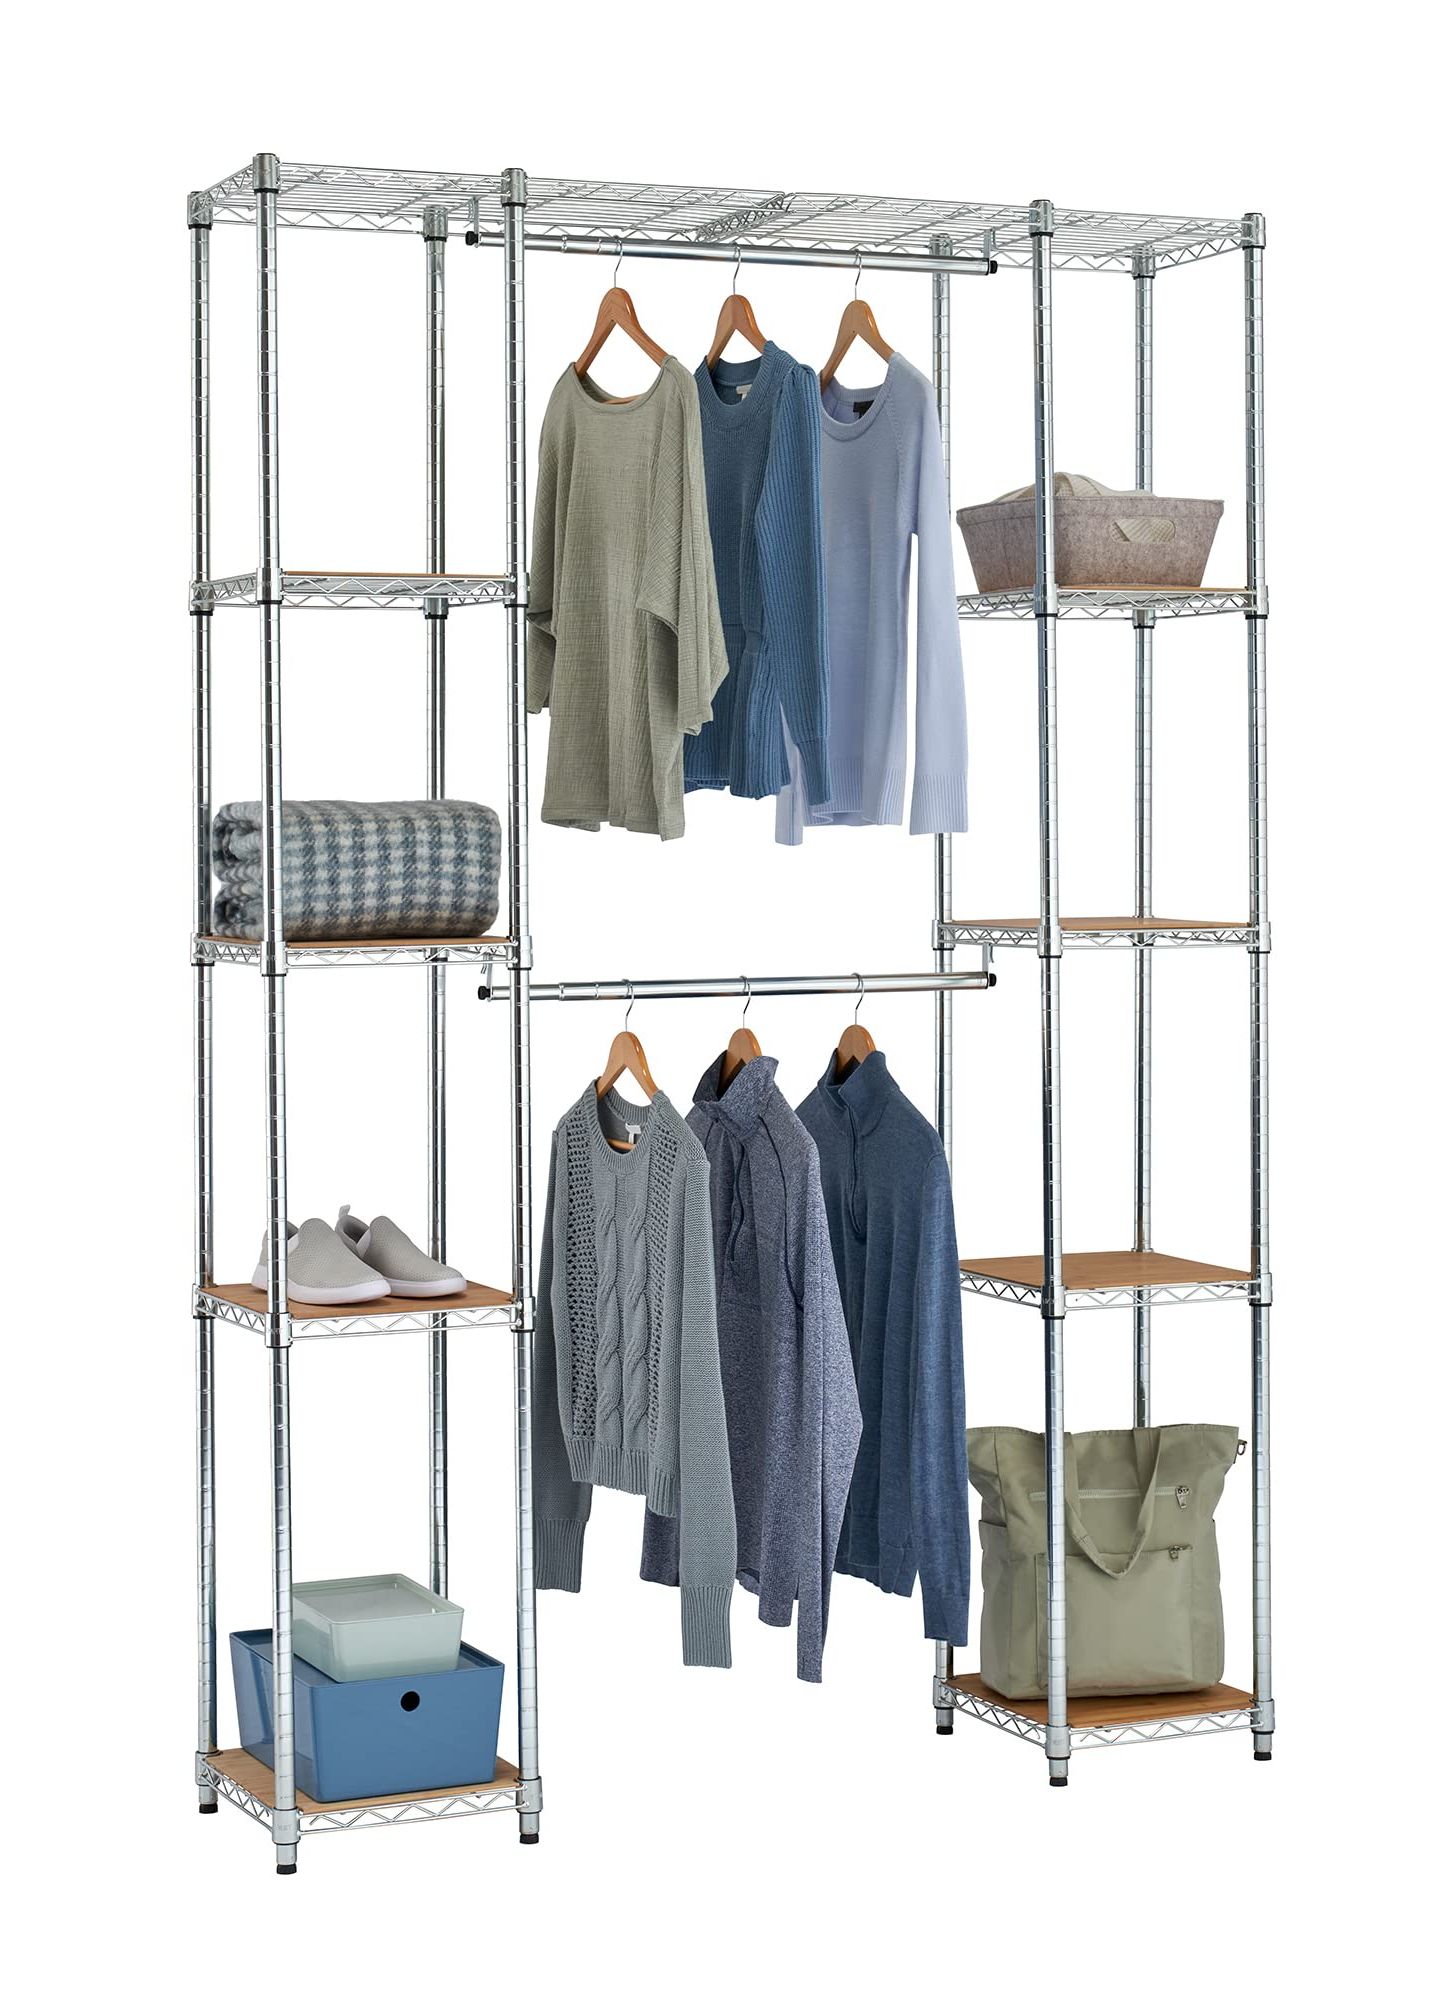 2017 Amazon: Trinity Ecostorage Expandable Garment Rack With Bamboo Shelves  For Clothing Storage, Closet Organization For Home, Apartment, Dorm Room  And More, Chrome, 56 76” W X 14” D X 84” H : Everything Else Throughout Chrome Garment Wardrobes (Photo 3 of 10)